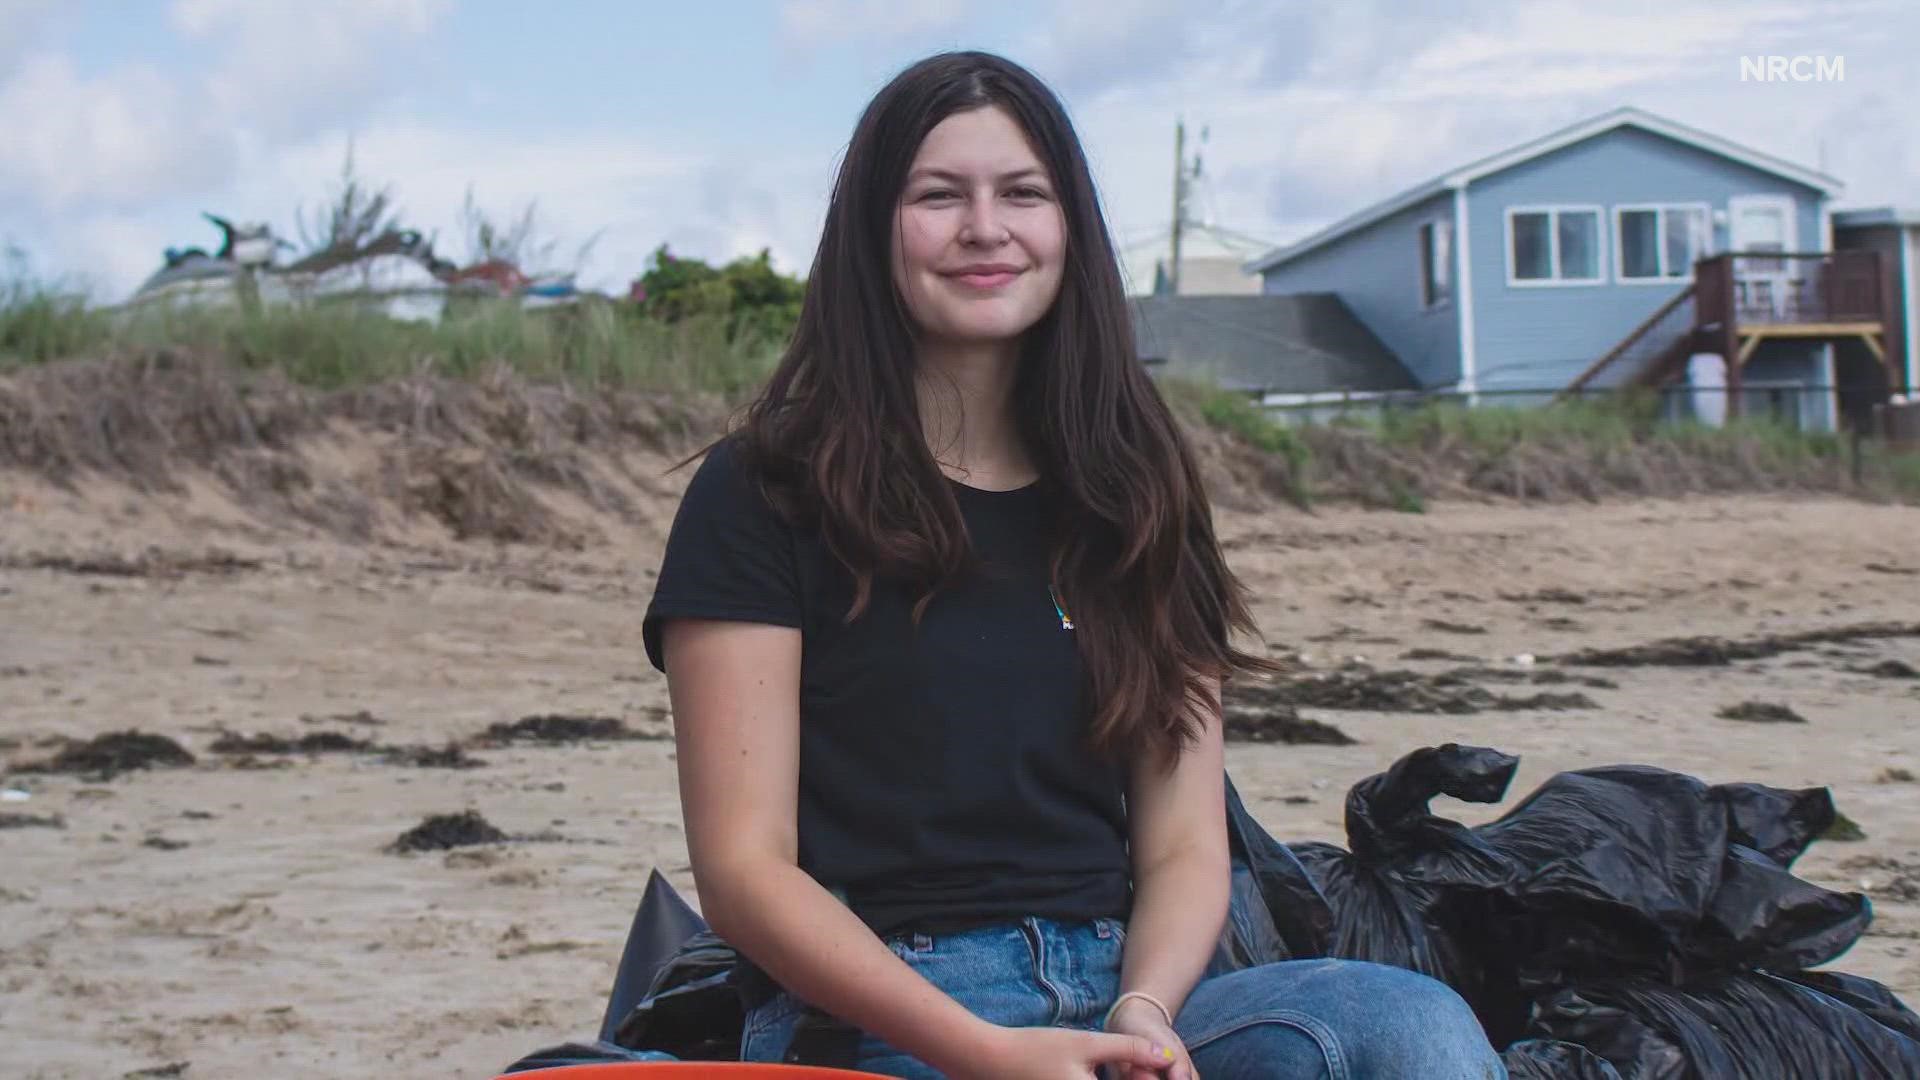 “If the entire world is stemming into chaos, what’s something that I can do?” Kiara Frischkorn, a marine studies student, said.